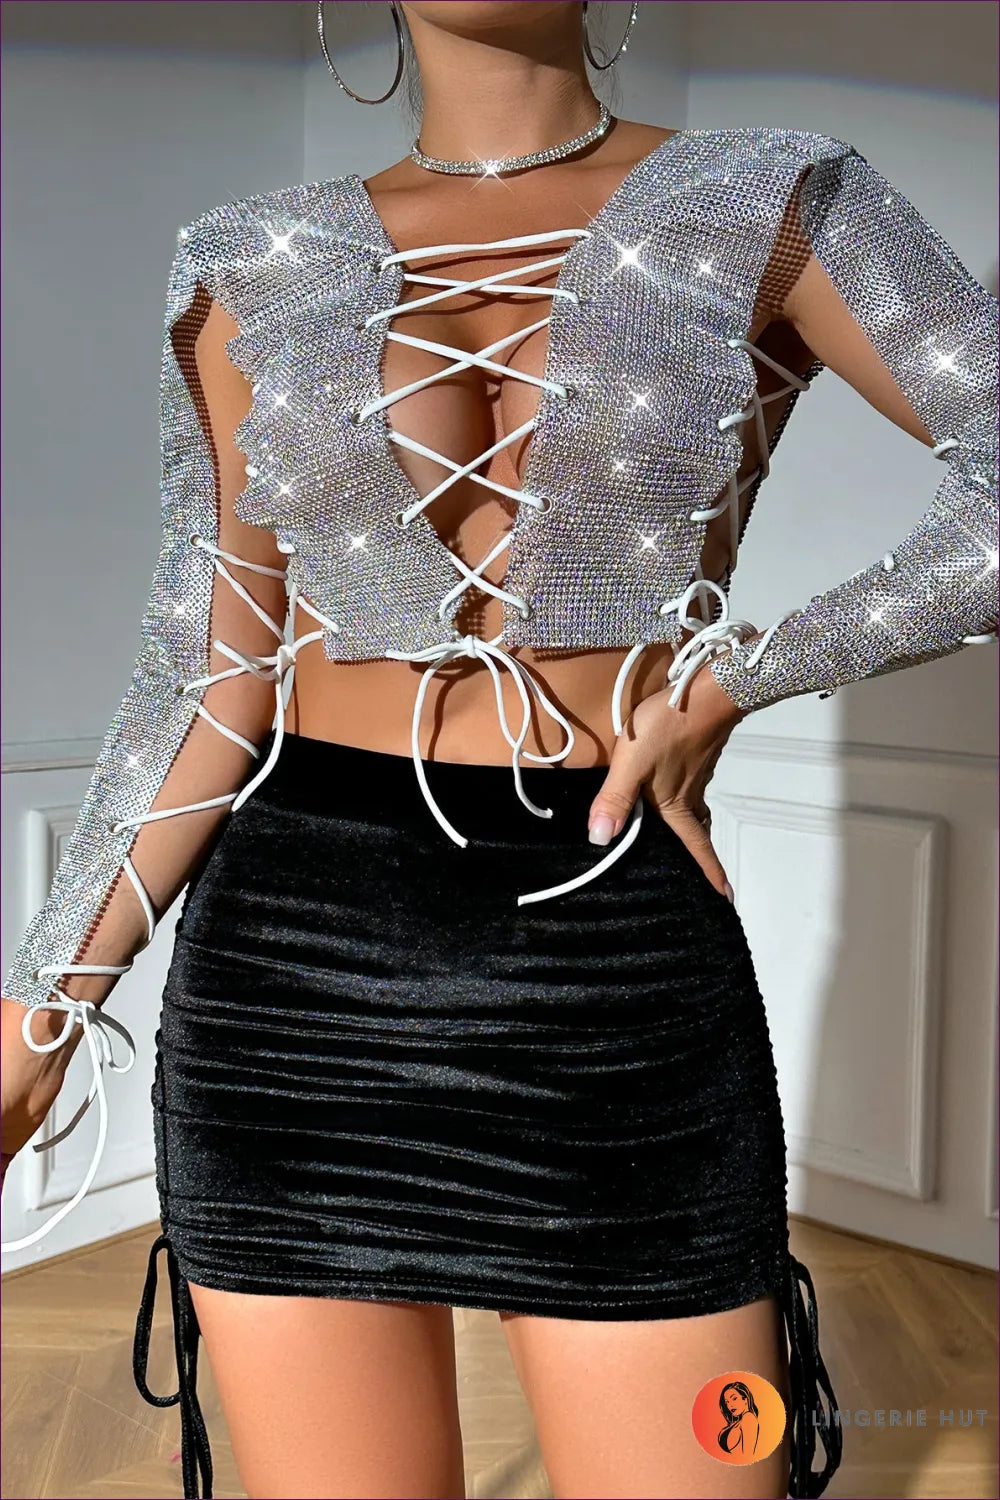 Step Into The Spotlight With Lingerie Hut’s Rhinestone Backless Crop Top. Its Captivating Sparkle And Bold